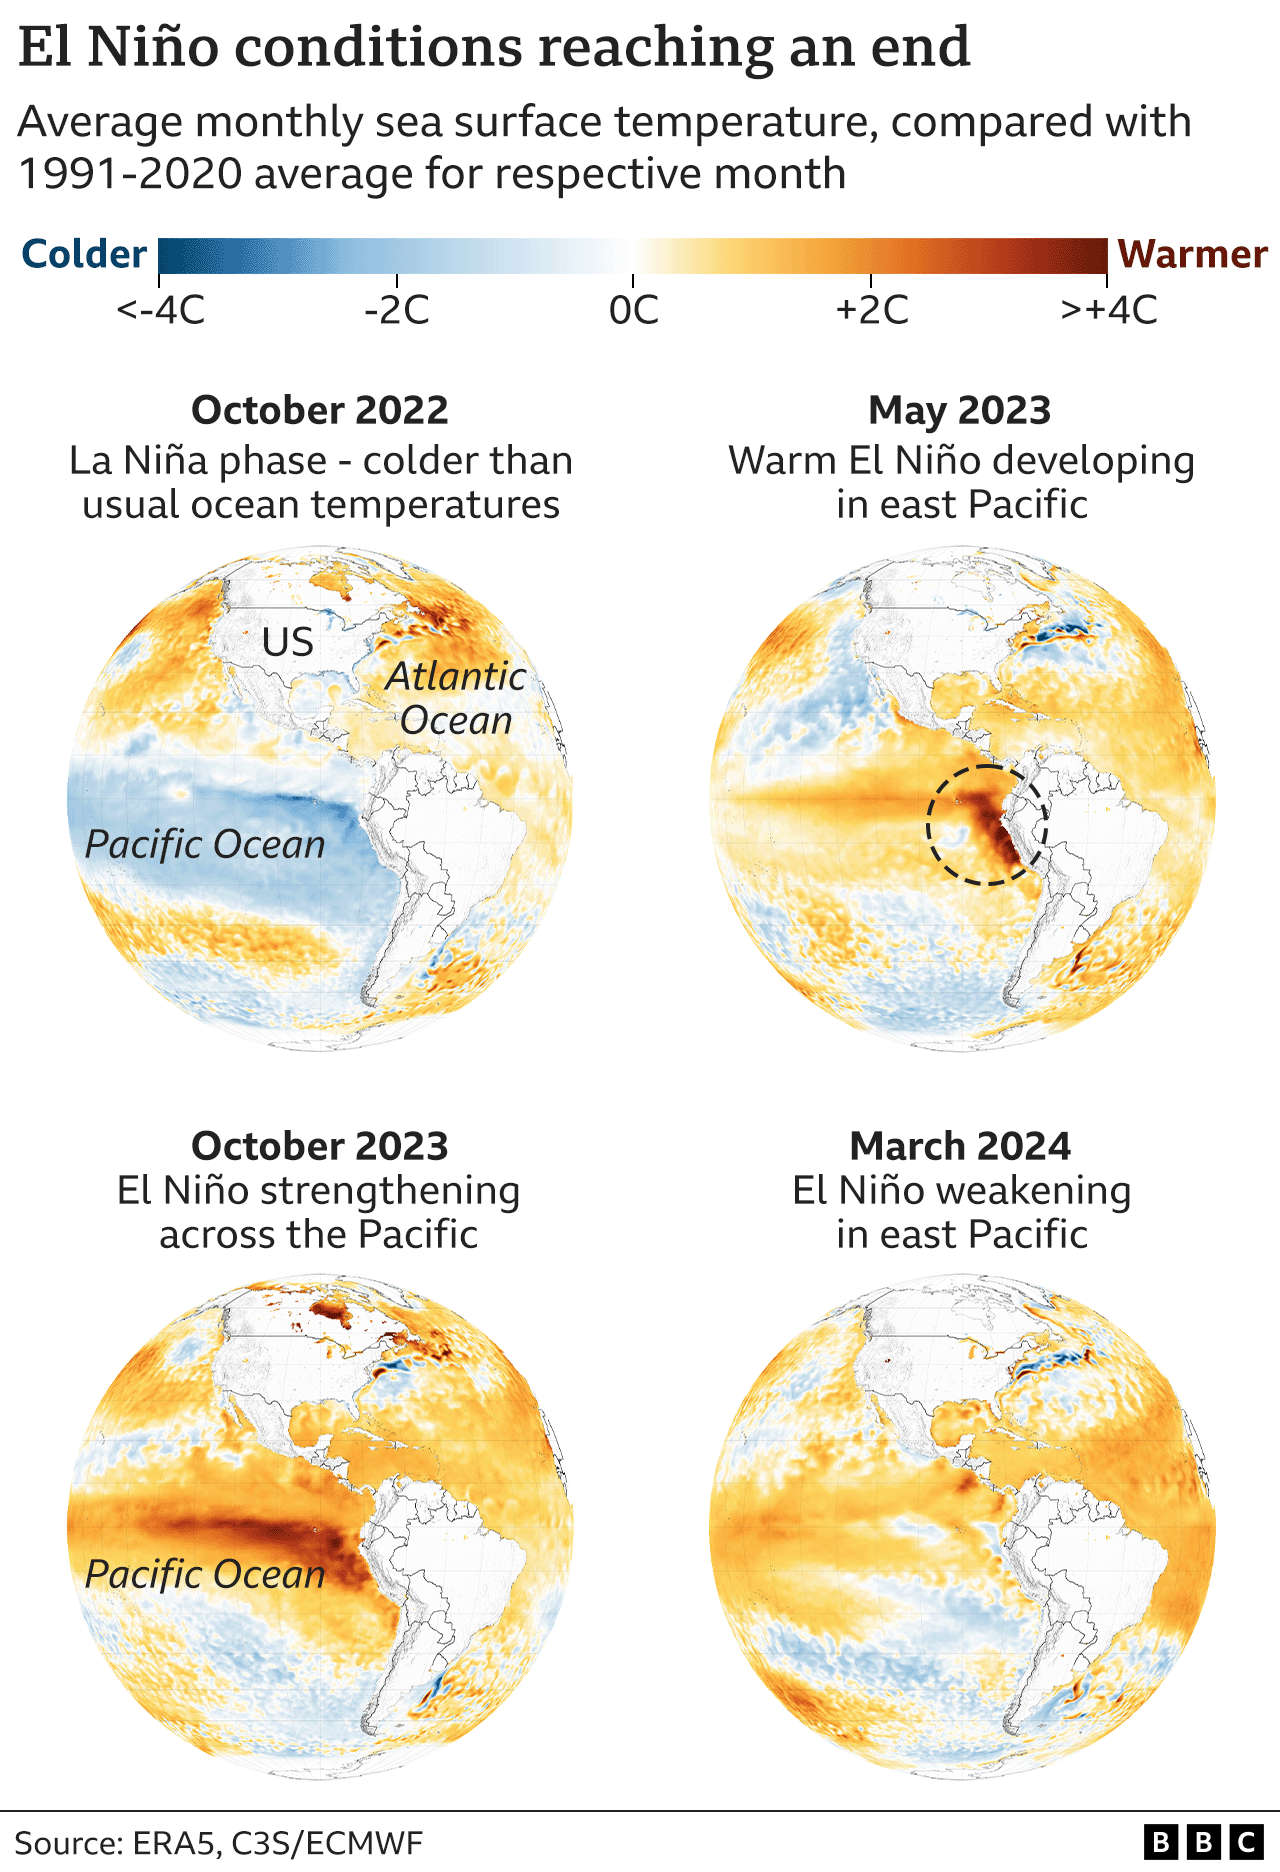 Four maps showing different stages of El Niño and La Niña. La Niña (October 2022) is marked by cool waters in the Pacific. El Niño conditions were emerging by May 2023 with warm waters in the East Pacific, and El Niño had strengthened by October 2023 as warm waters spread. In March 2024, waters had begun to cool as El Niño weakened.